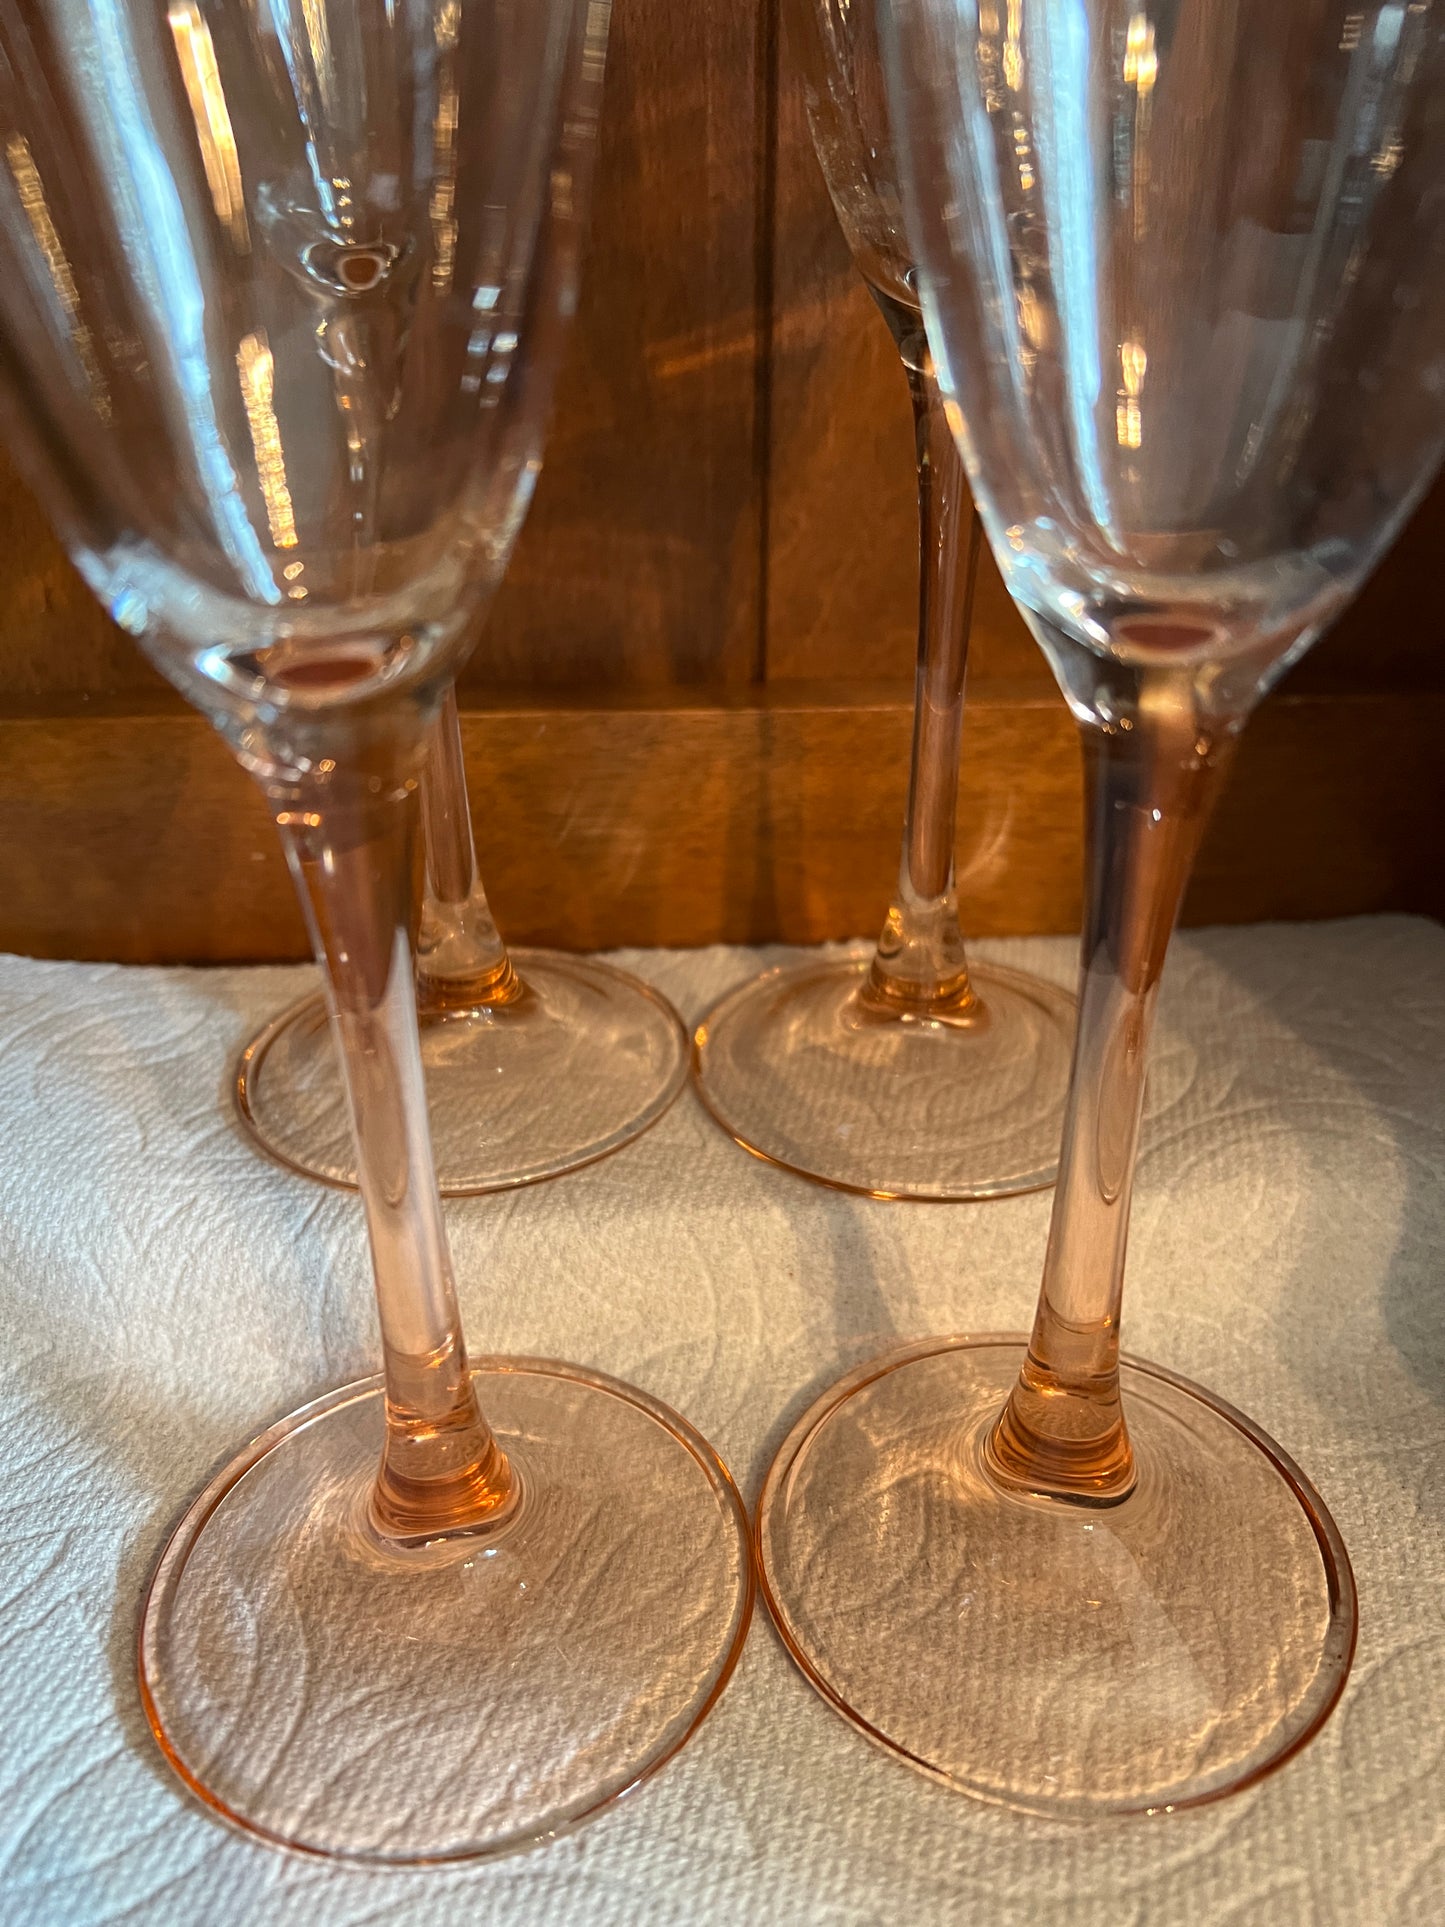 Pink Footed Champagne Glasses (4)